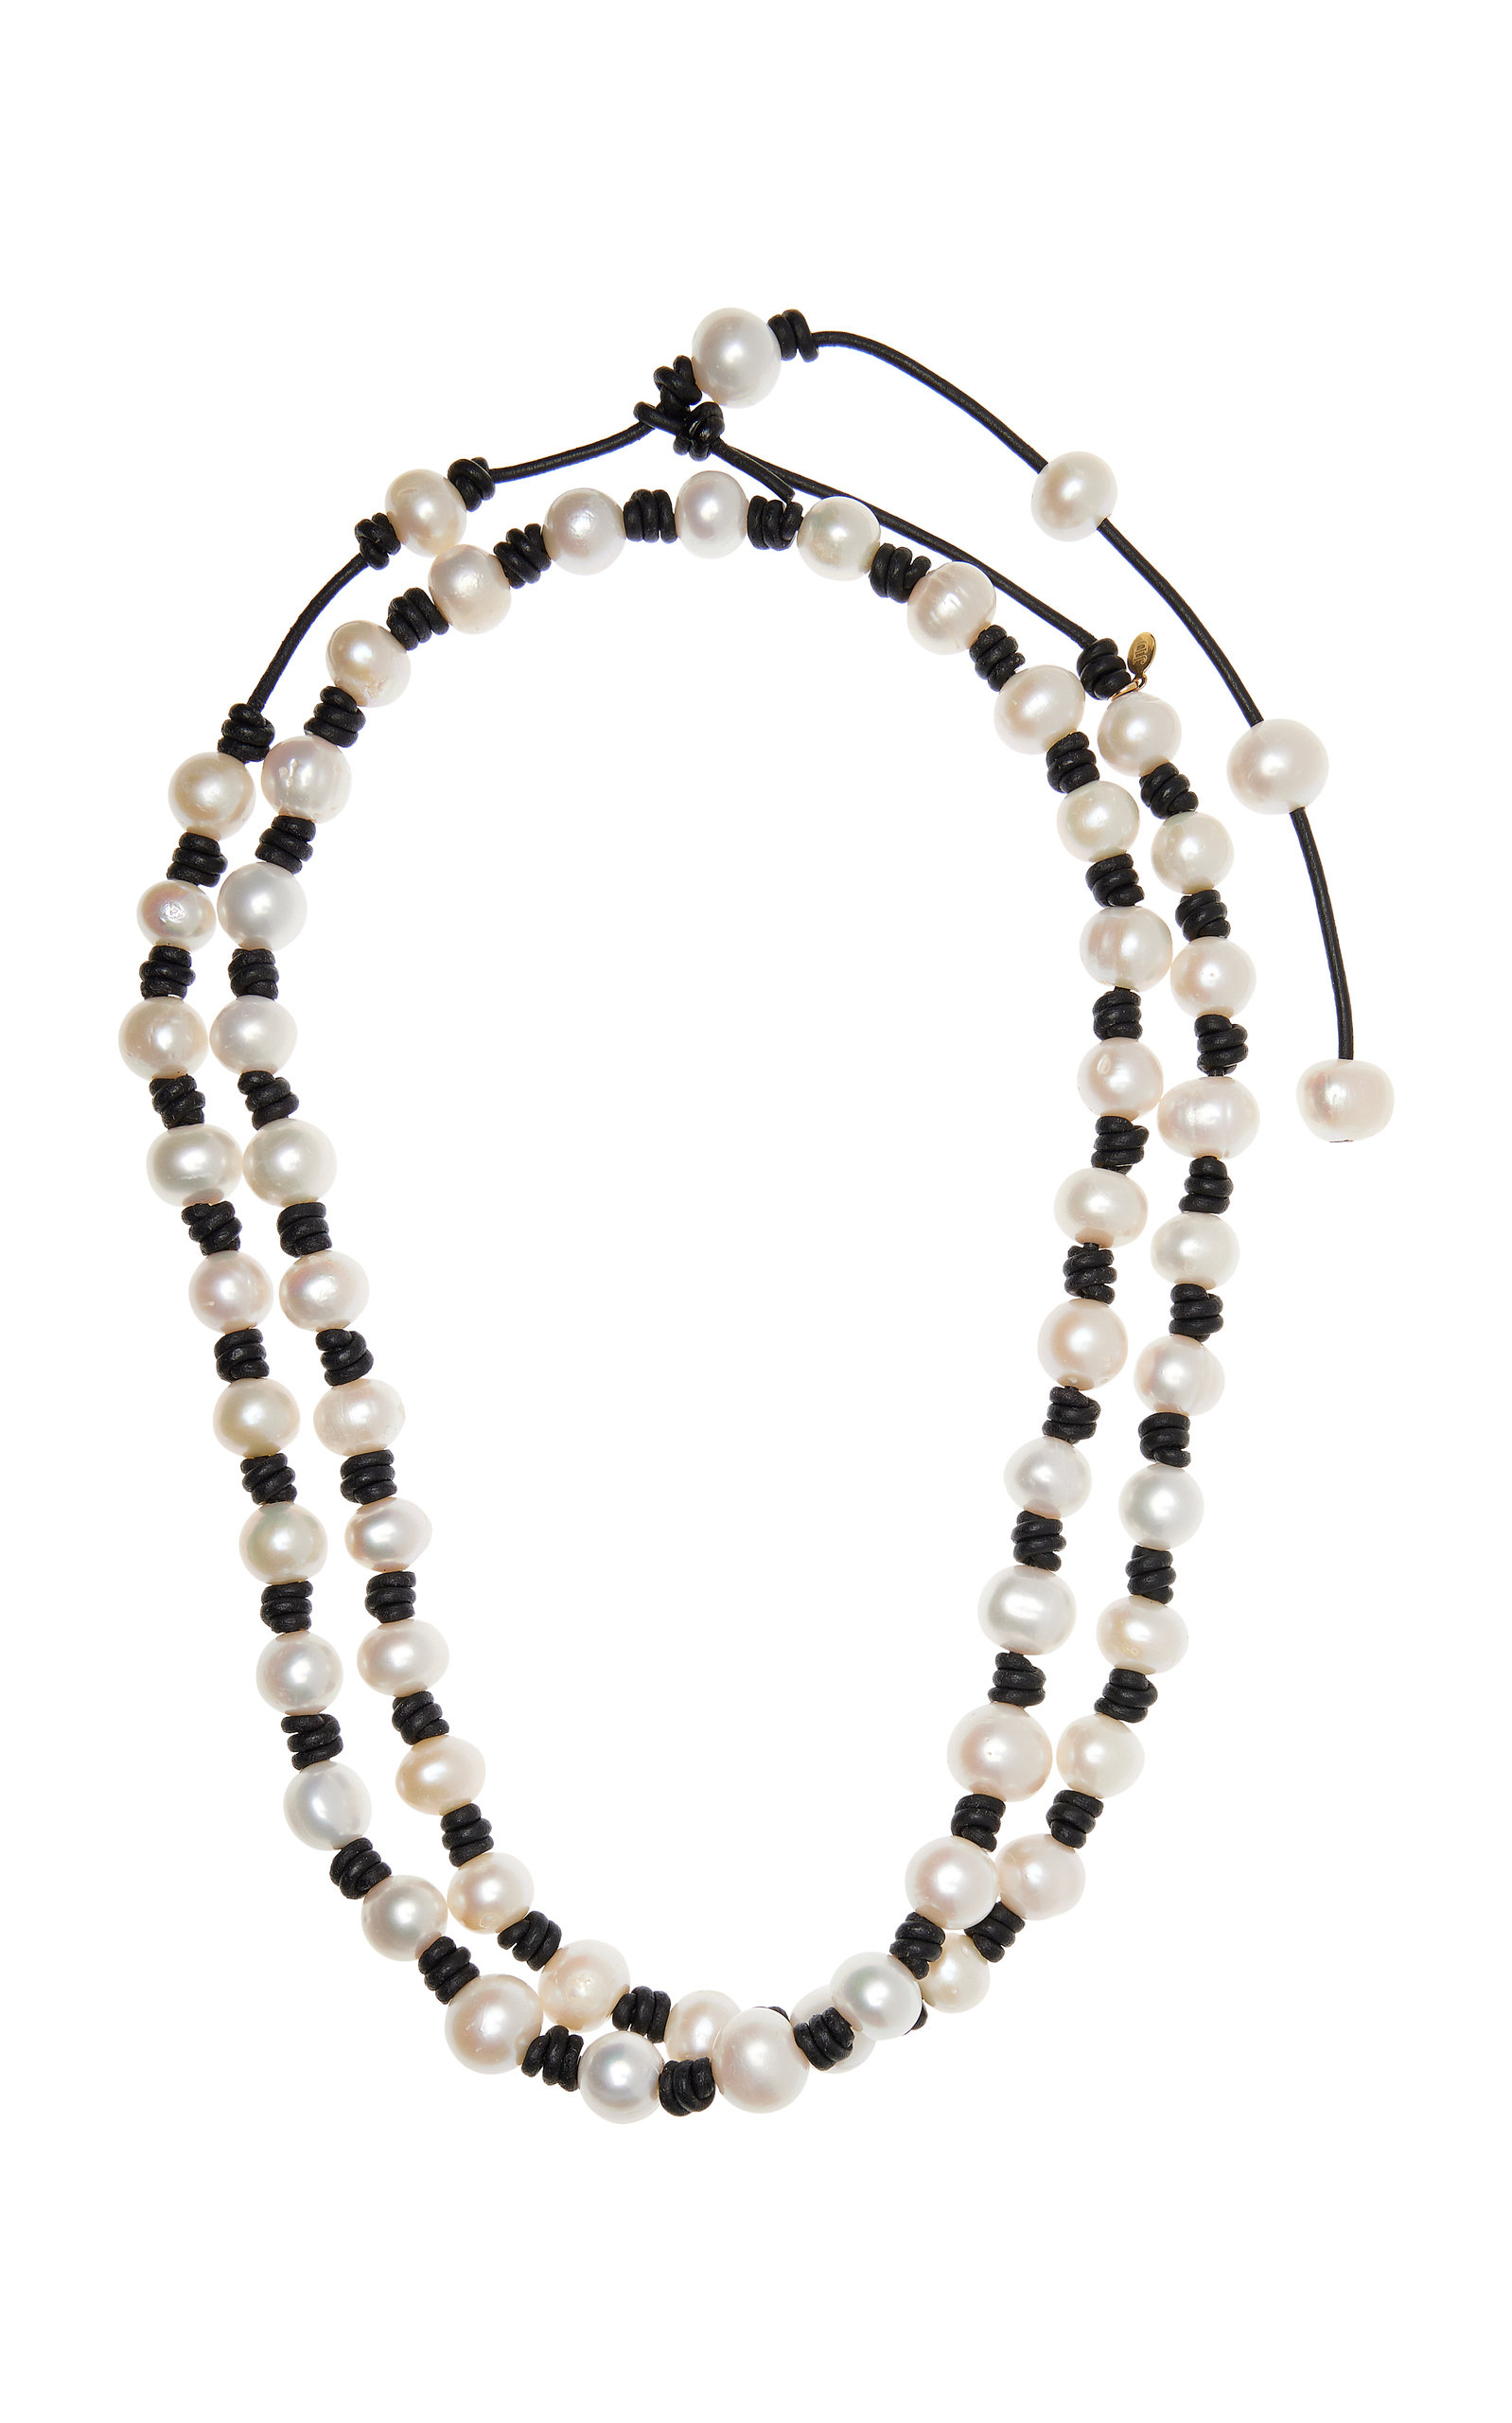 Joie DiGiovanni Women's Knotted Large Pearl and Leather Necklace with Tail